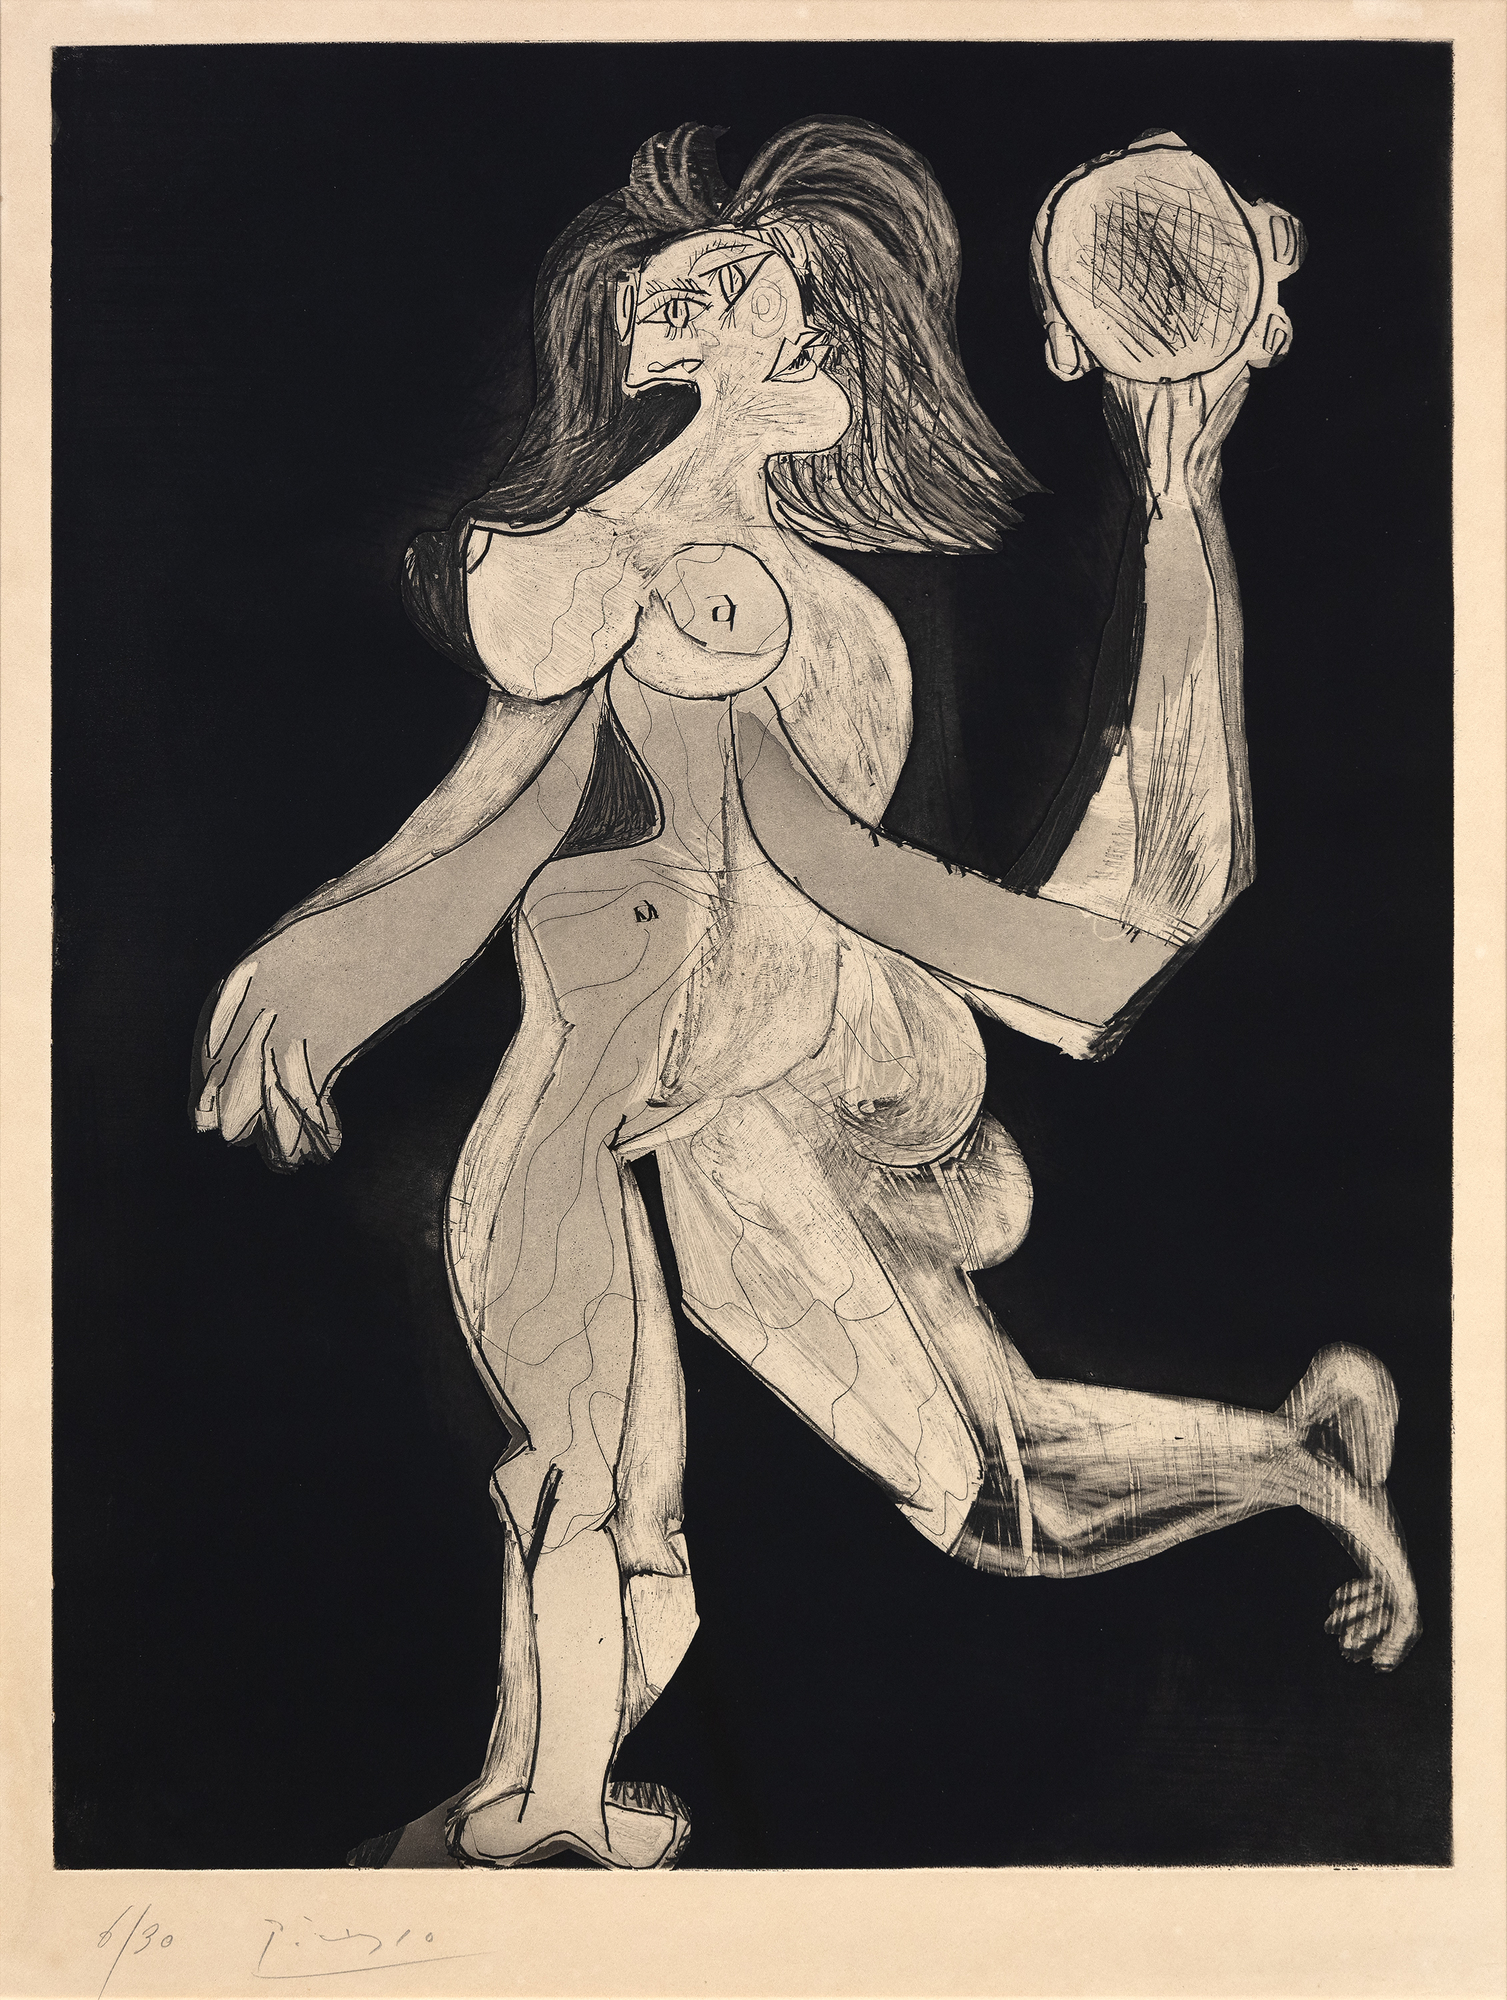 "La femme au tambourin" (1939) is one of Pablo Picasso’s greatest graphic works. Partially based on compositions by Degas and Poussin, the work exudes a strong Classical presence with a Modernist edge. Thought to be a depiction of Dora Maar, Picasso’s lover at the time, the print is highly coveted by institutional and private collectors. One impression from this edition is included in the permanent collection of the Museum of Modern Art, New York, and another is included in the National Gallery of Art, Washington, D.C.<br><br>Picasso’s experimentations in printmaking began in the first decade of the 20th century and engaged him for many decades, into the 1970s. In this time, Picasso embraced multiple methods of printmaking, including lithography, etching, aquatint, and linoleum block printing. His earliest prints were, like the present work, intaglio. With La femme au tambourin, Picasso incorporated the additional medium of aquatint, which yielded a watercolor-like effect throughout the composition and an extreme range of tonal qualities. This technique in particular afforded opportunities for expression that could not be found in painting. For his experimental reach and depth of mastery, Picasso’s corpus of graphic work is among the most highly respected and coveted in the history of art, rivaling that of Rembrandt.